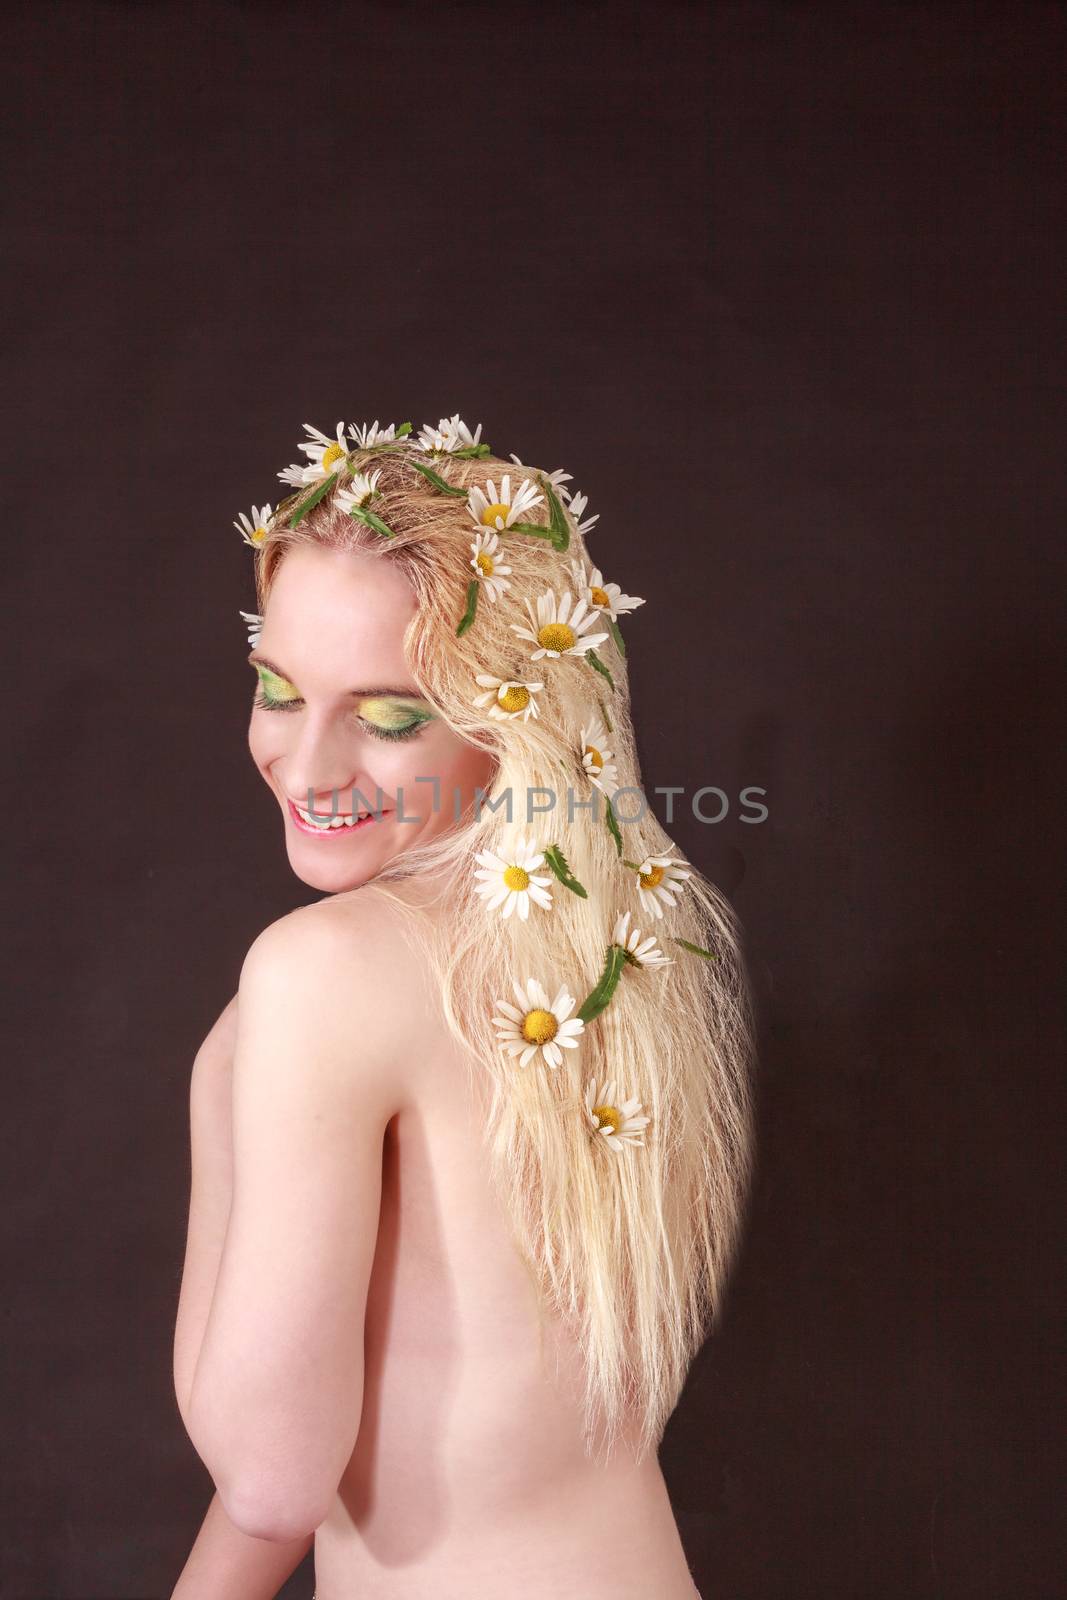 Half Body Shot of a Happy Bare Young Woman with Flowers on her Long Blond Hair, Looking on her Shoulder Against Black Background.